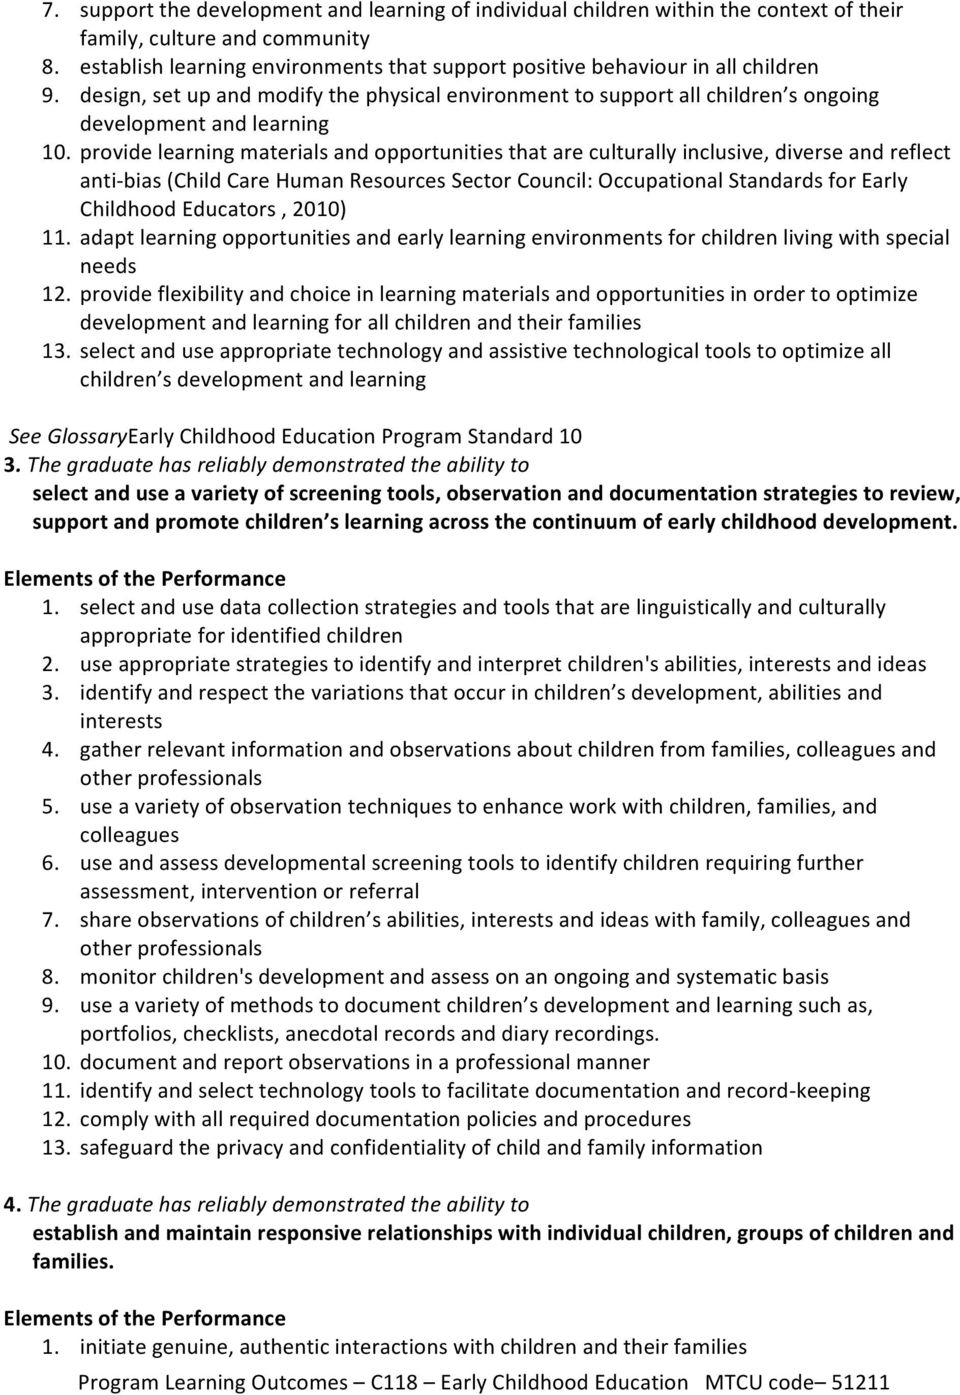 provide learning materials and opportunities that are culturally inclusive, diverse and reflect anti- bias (Child Care Human Resources Sector Council: Occupational Standards for Early Childhood